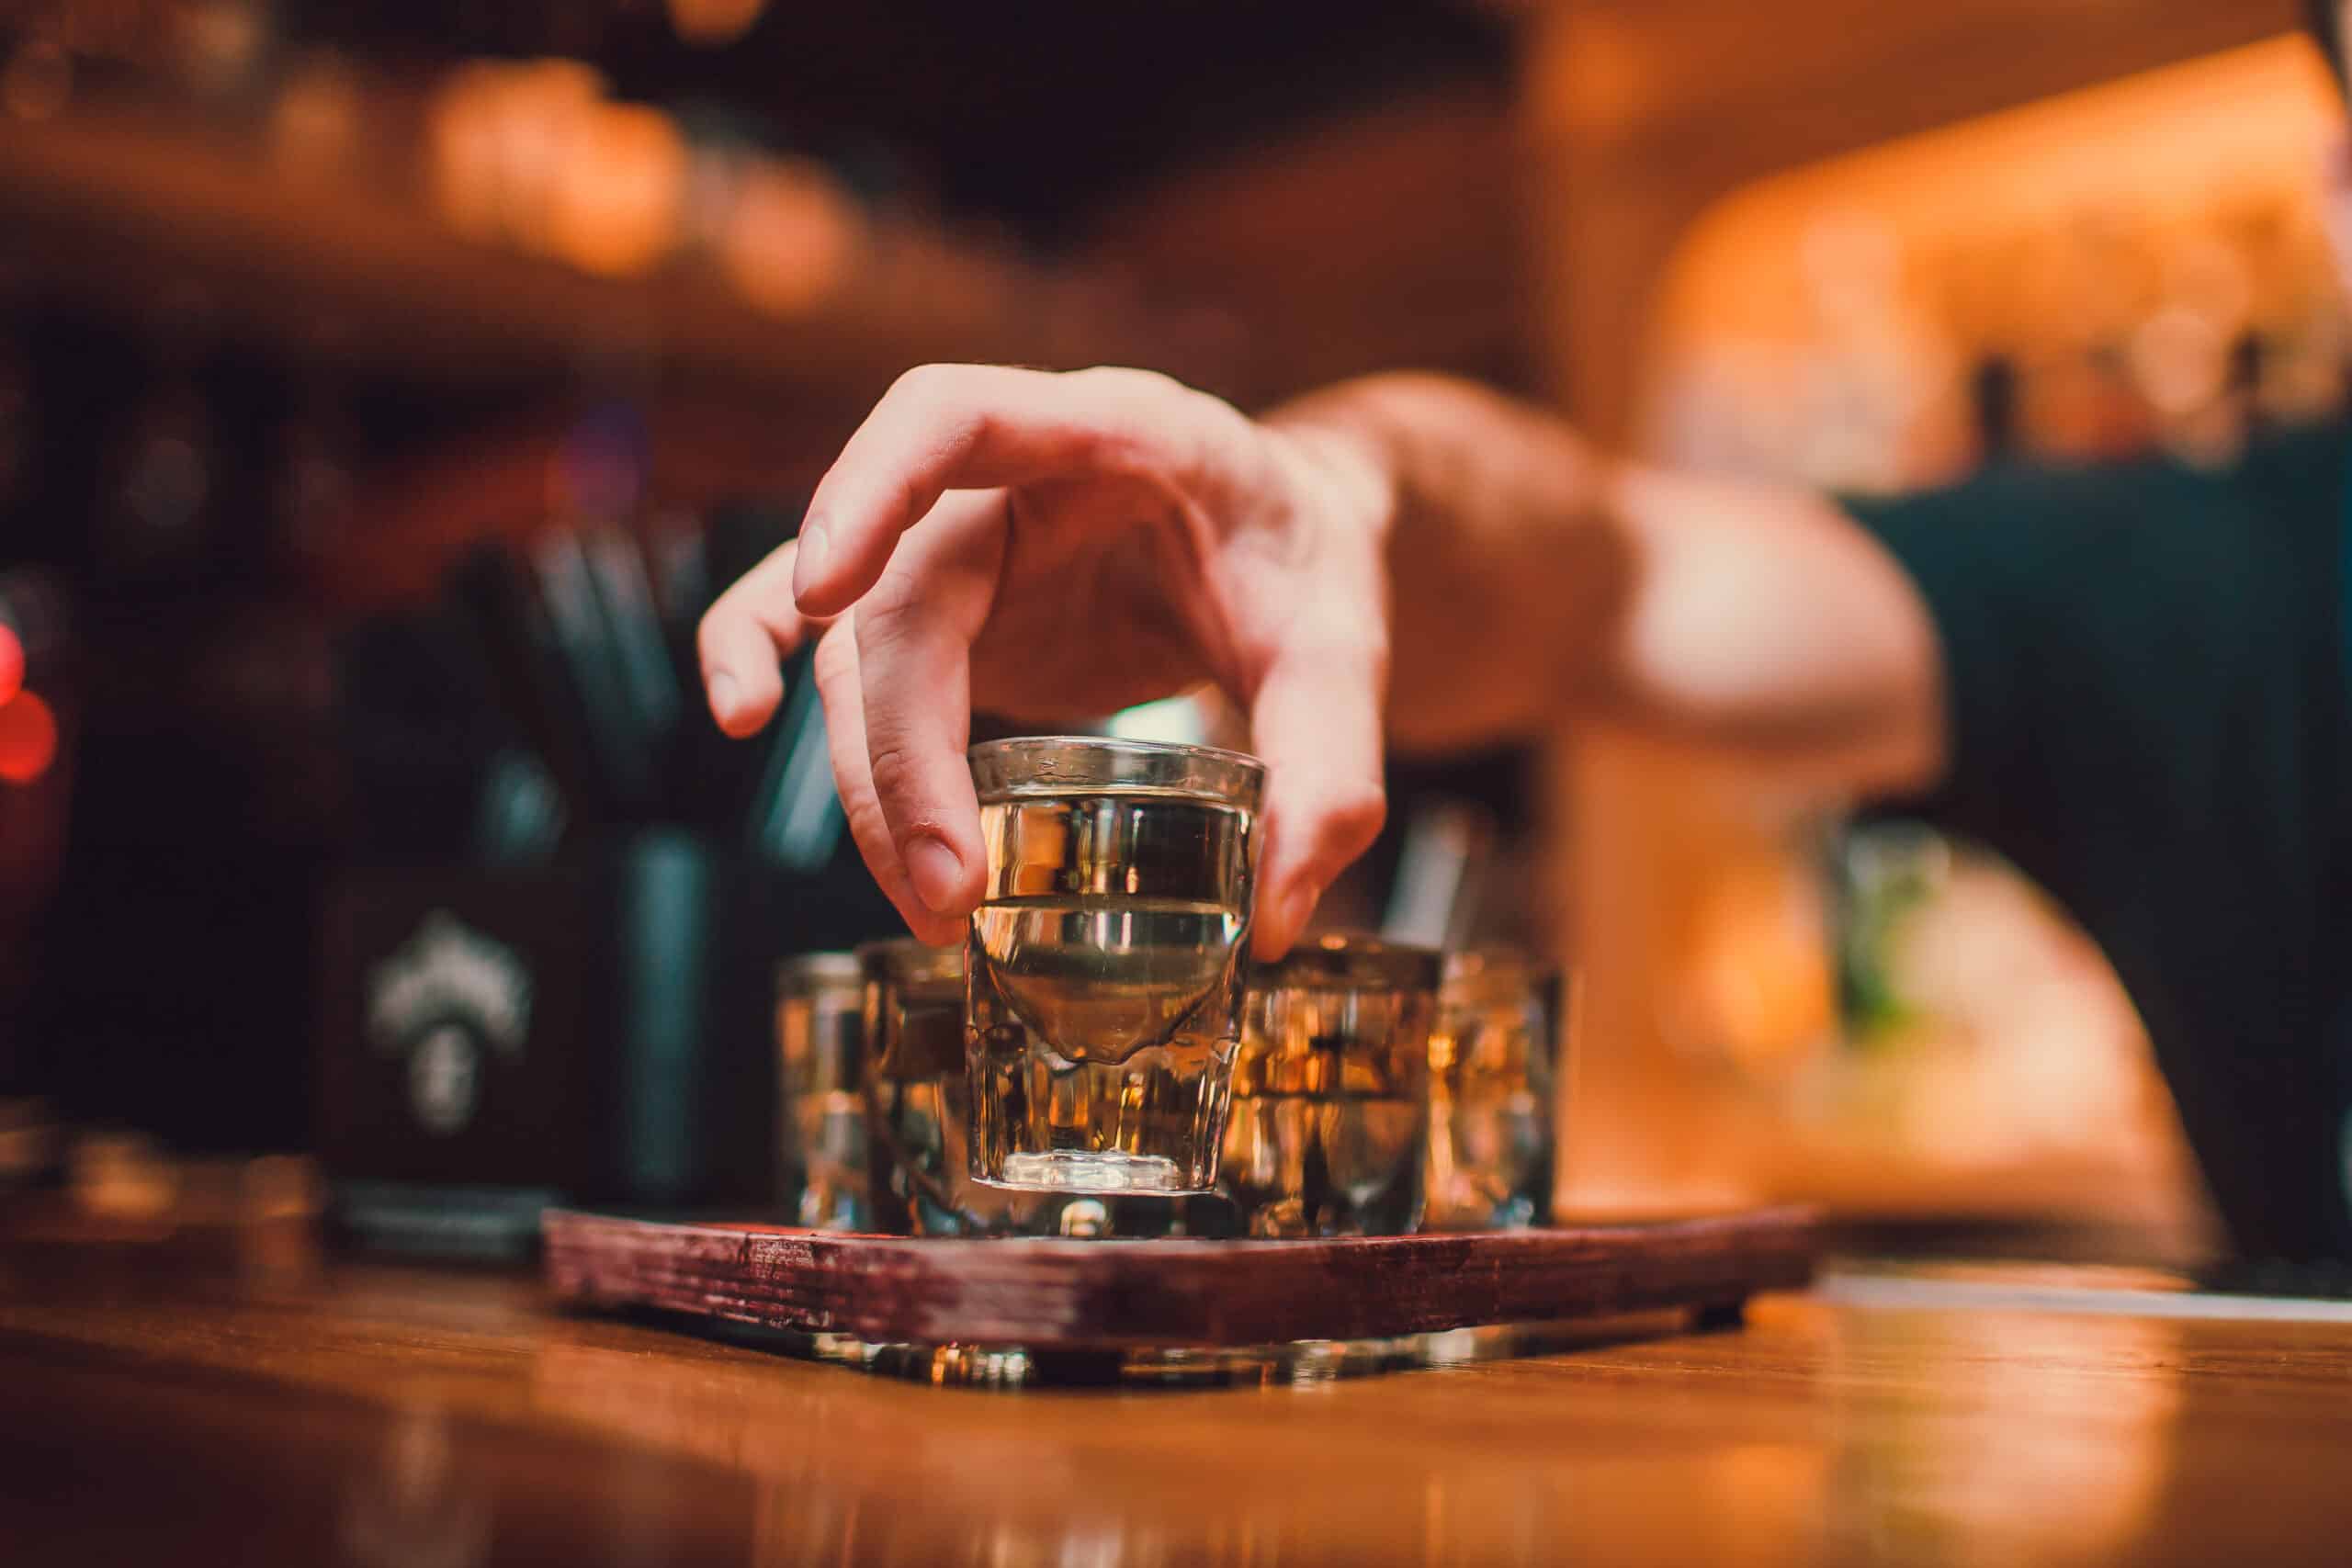 Tequila shot being served by a bartender